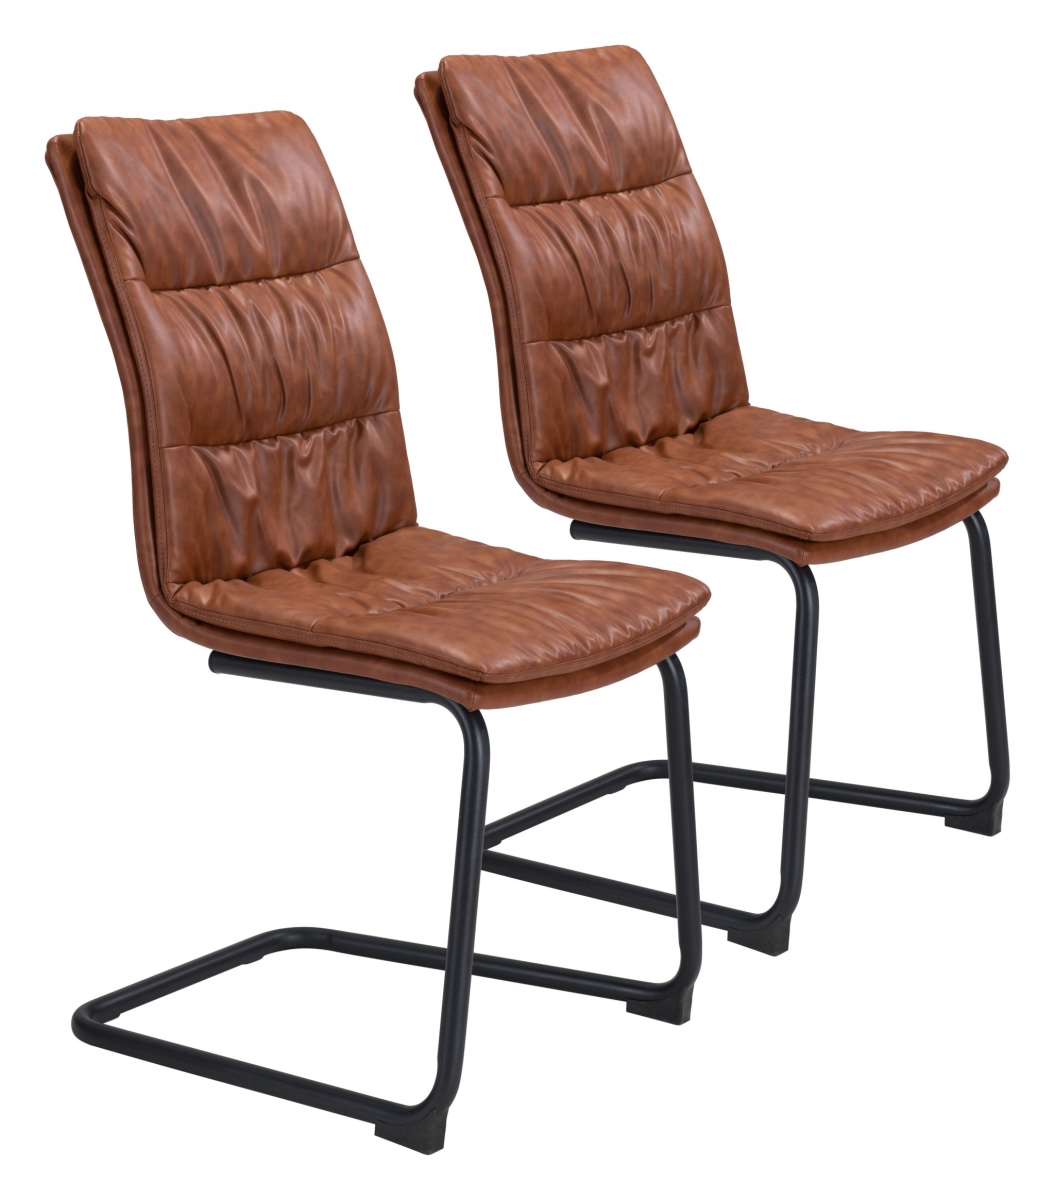 Sharon Dining Chair (Set of 2) Vintage Brown